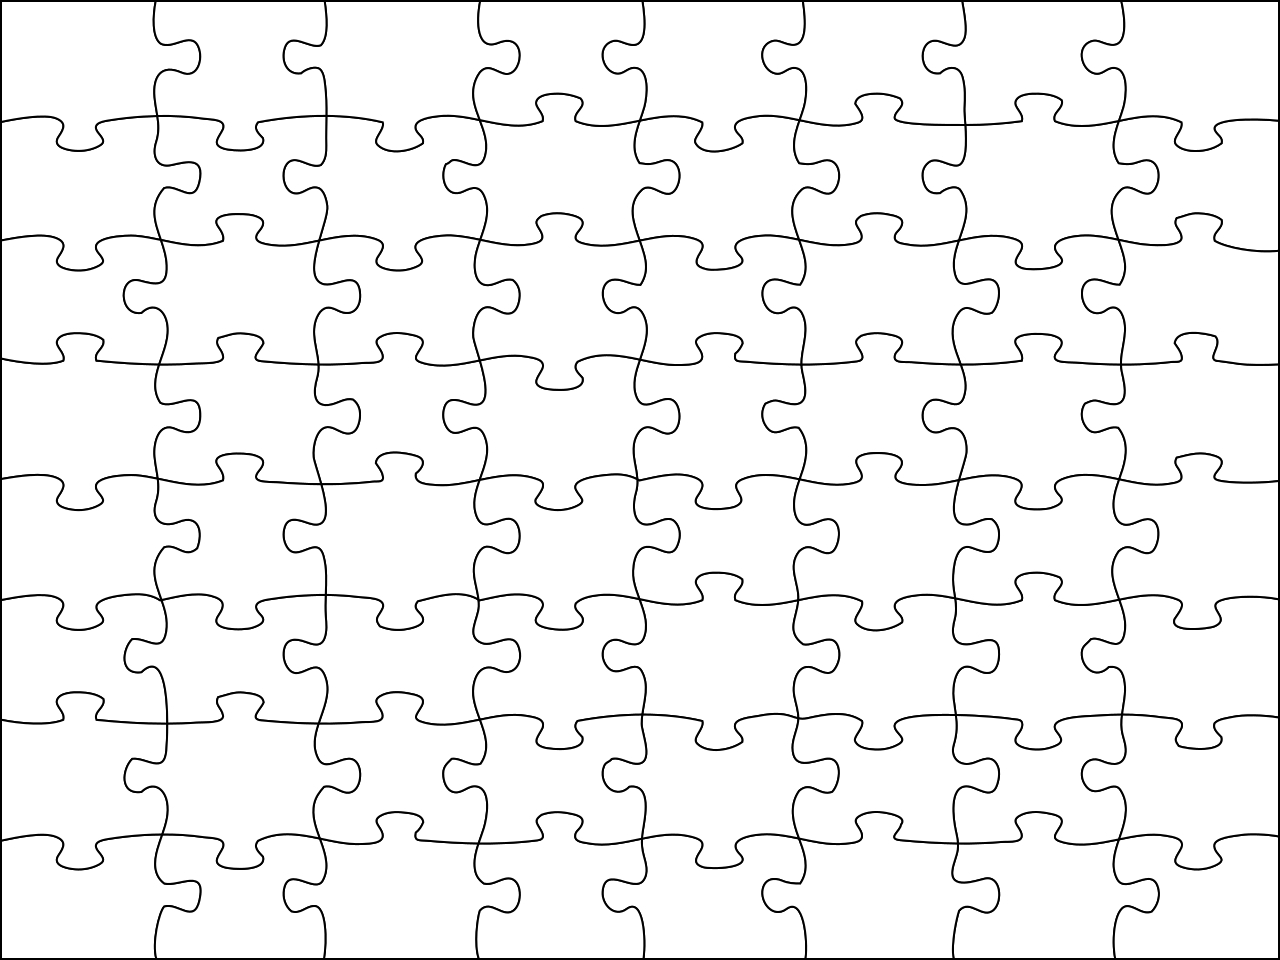 Jigsaw Puzzle Maker Free Printable | Free Printables - Printable Jigsaw Puzzle Maker